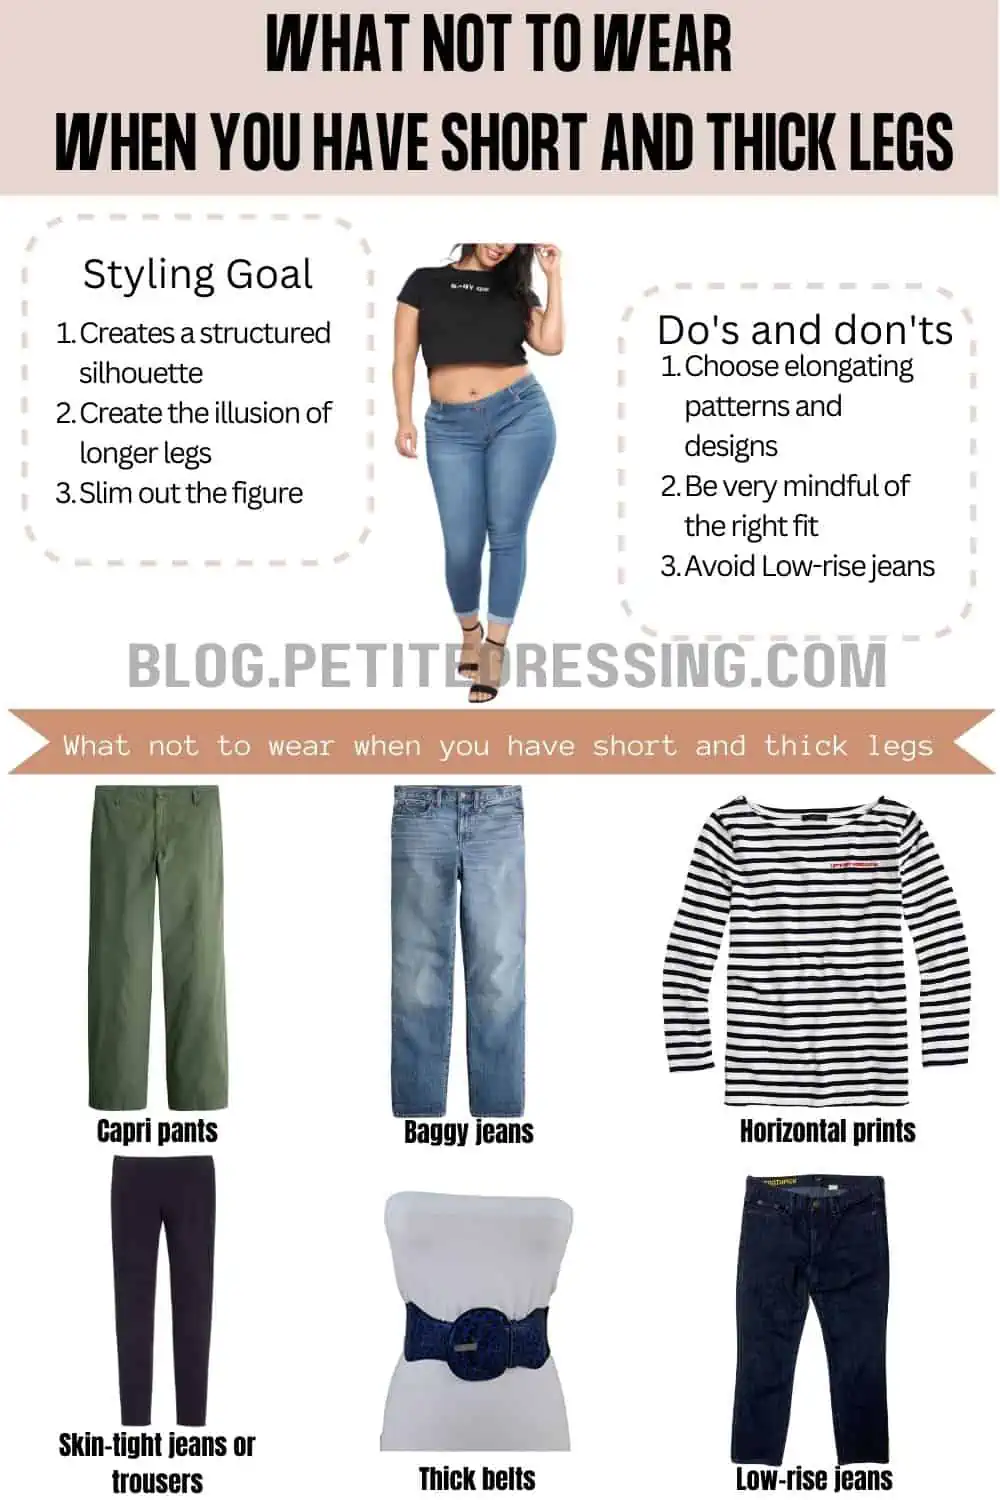 What not to wear when you have short and thick legs - Petite Dressing